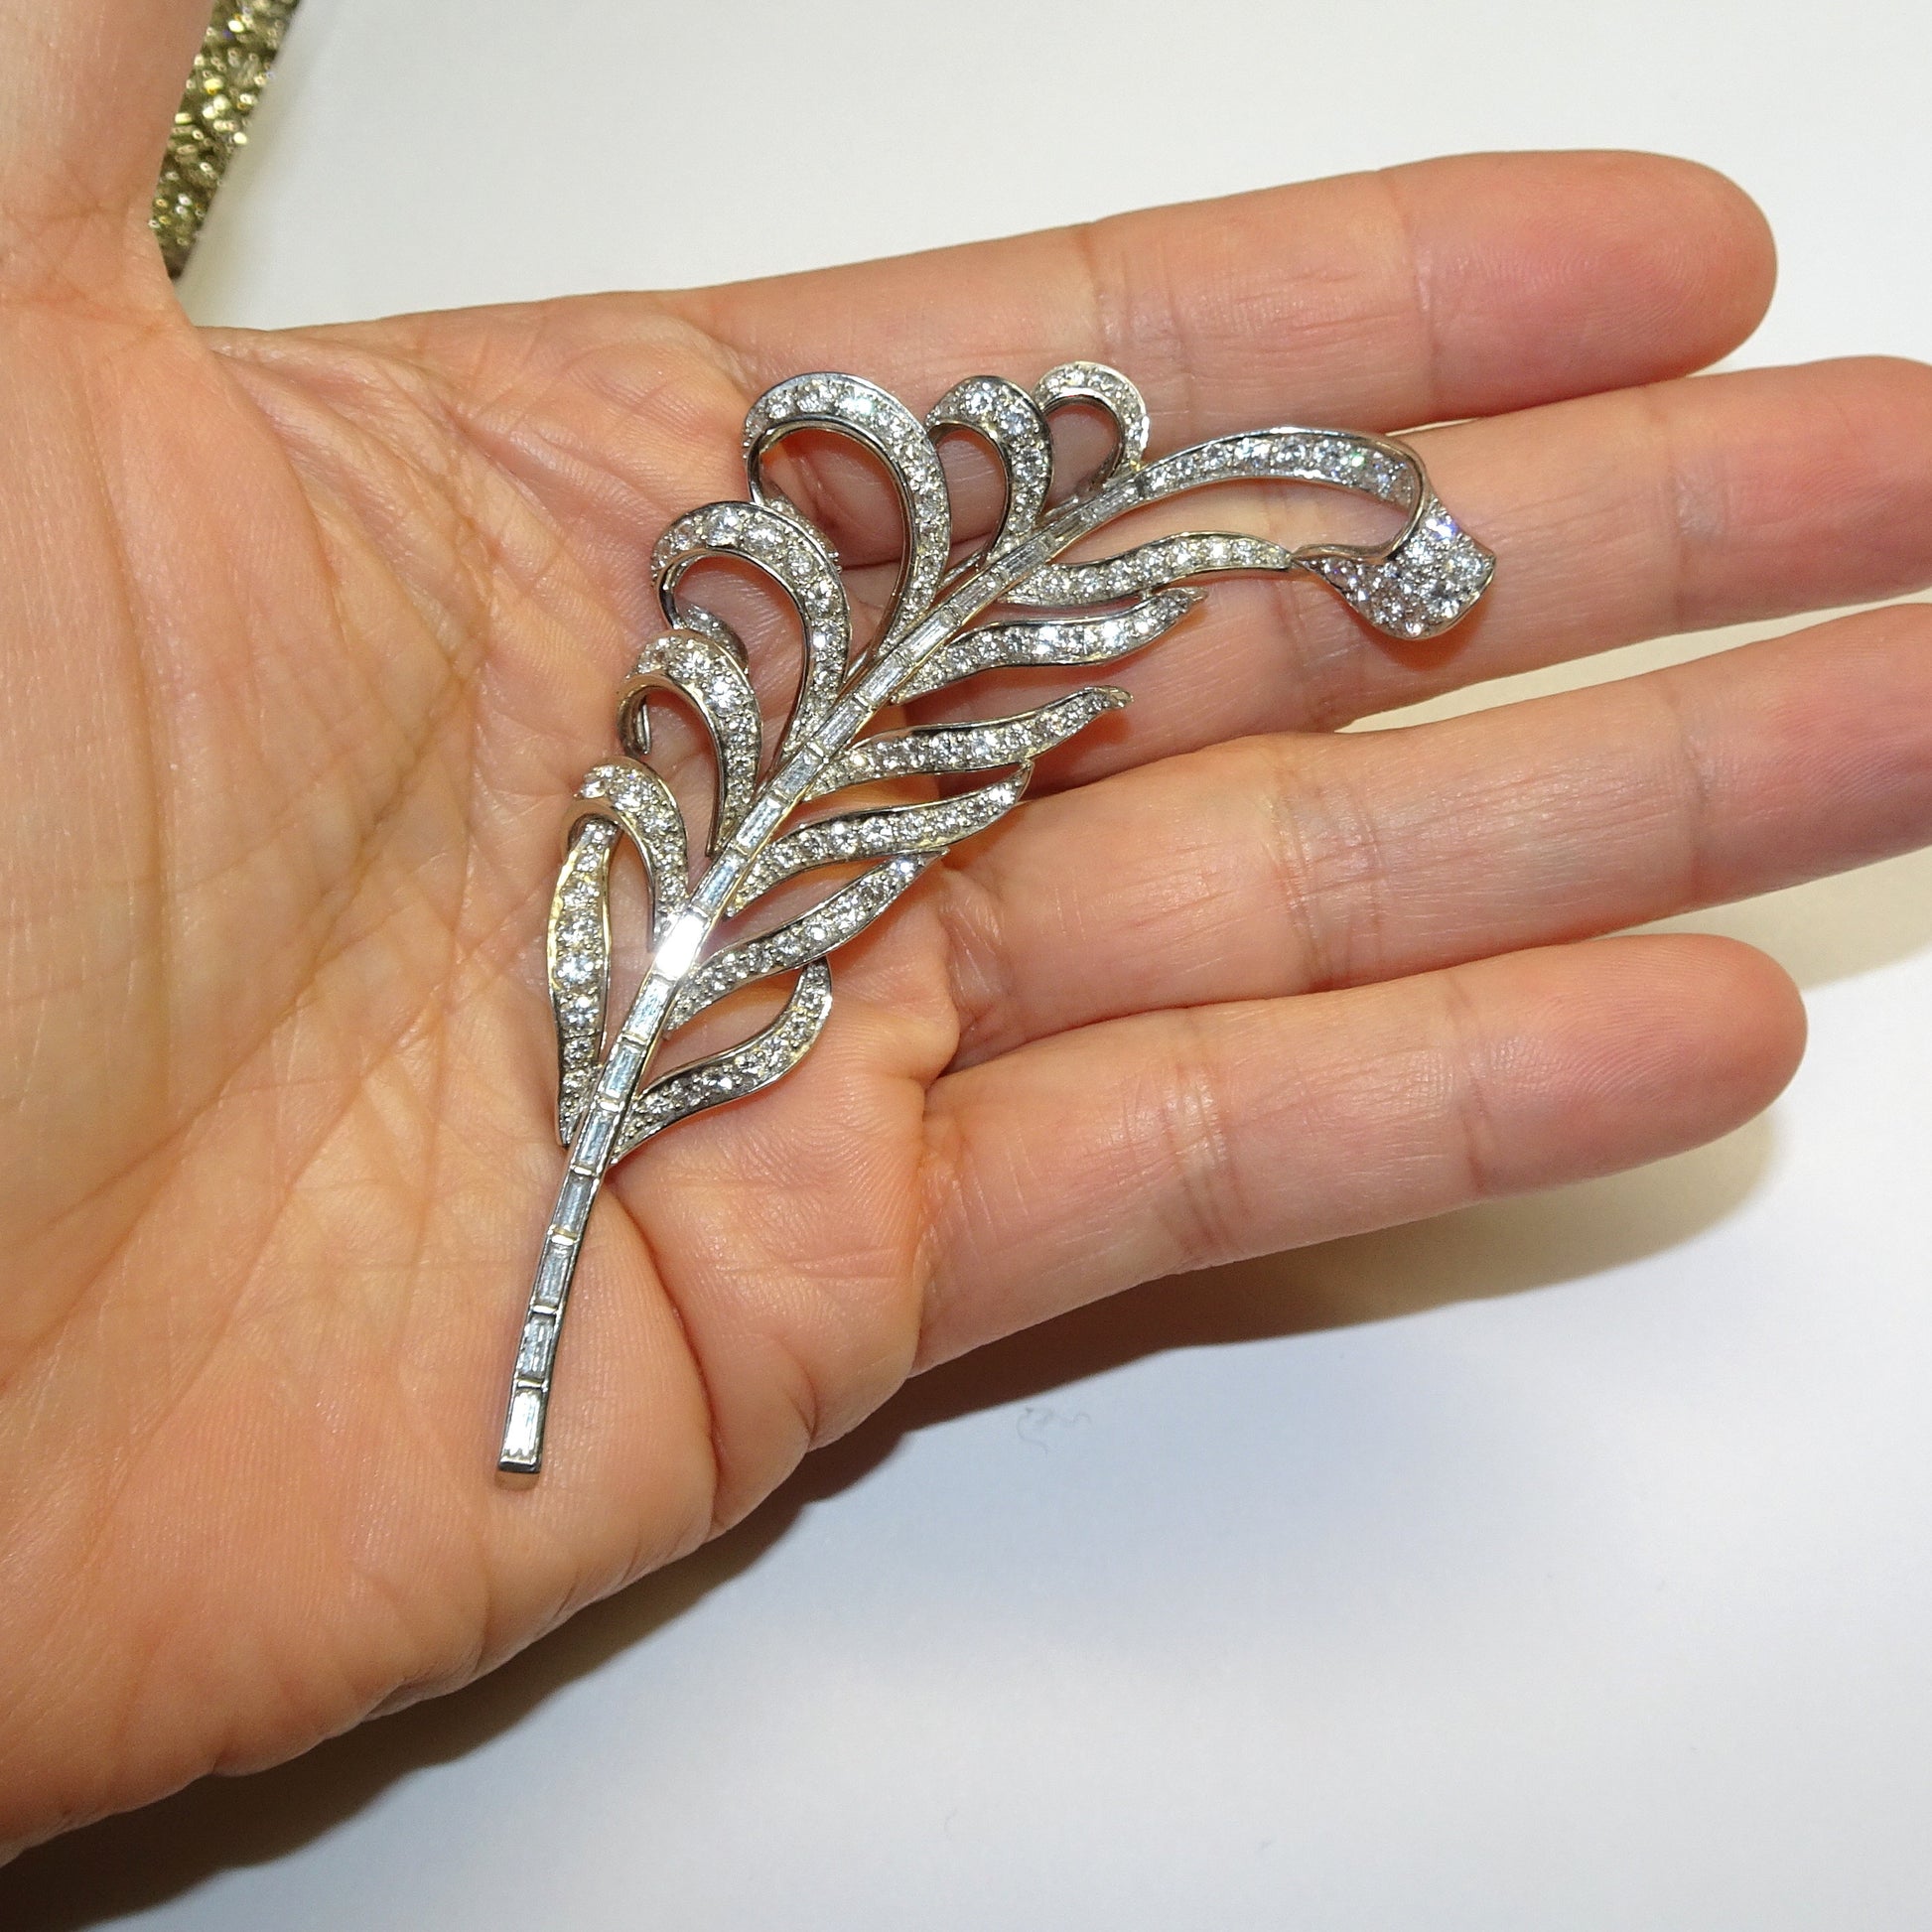 1940s Platinum Diamond Feather Brooch in hand